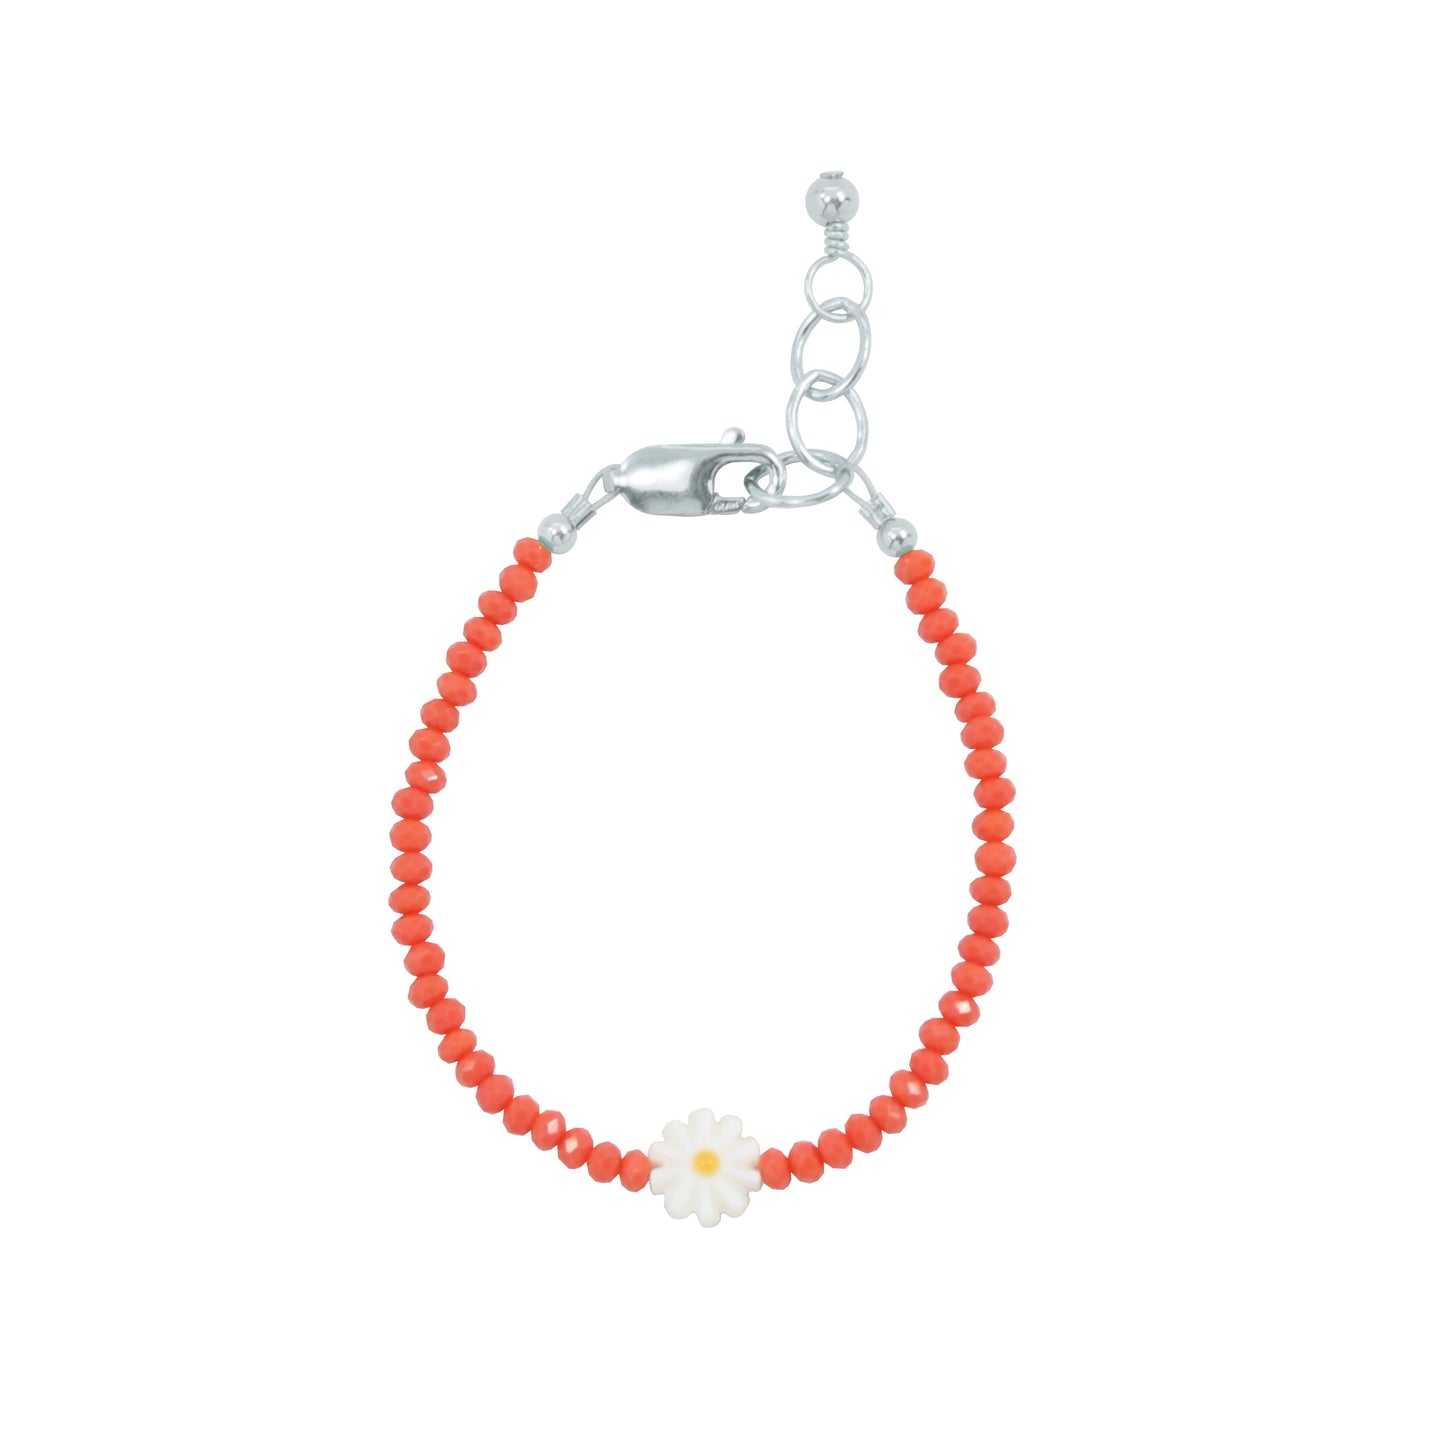 Daisy Adult Bracelet (Coral 4MM Beads)